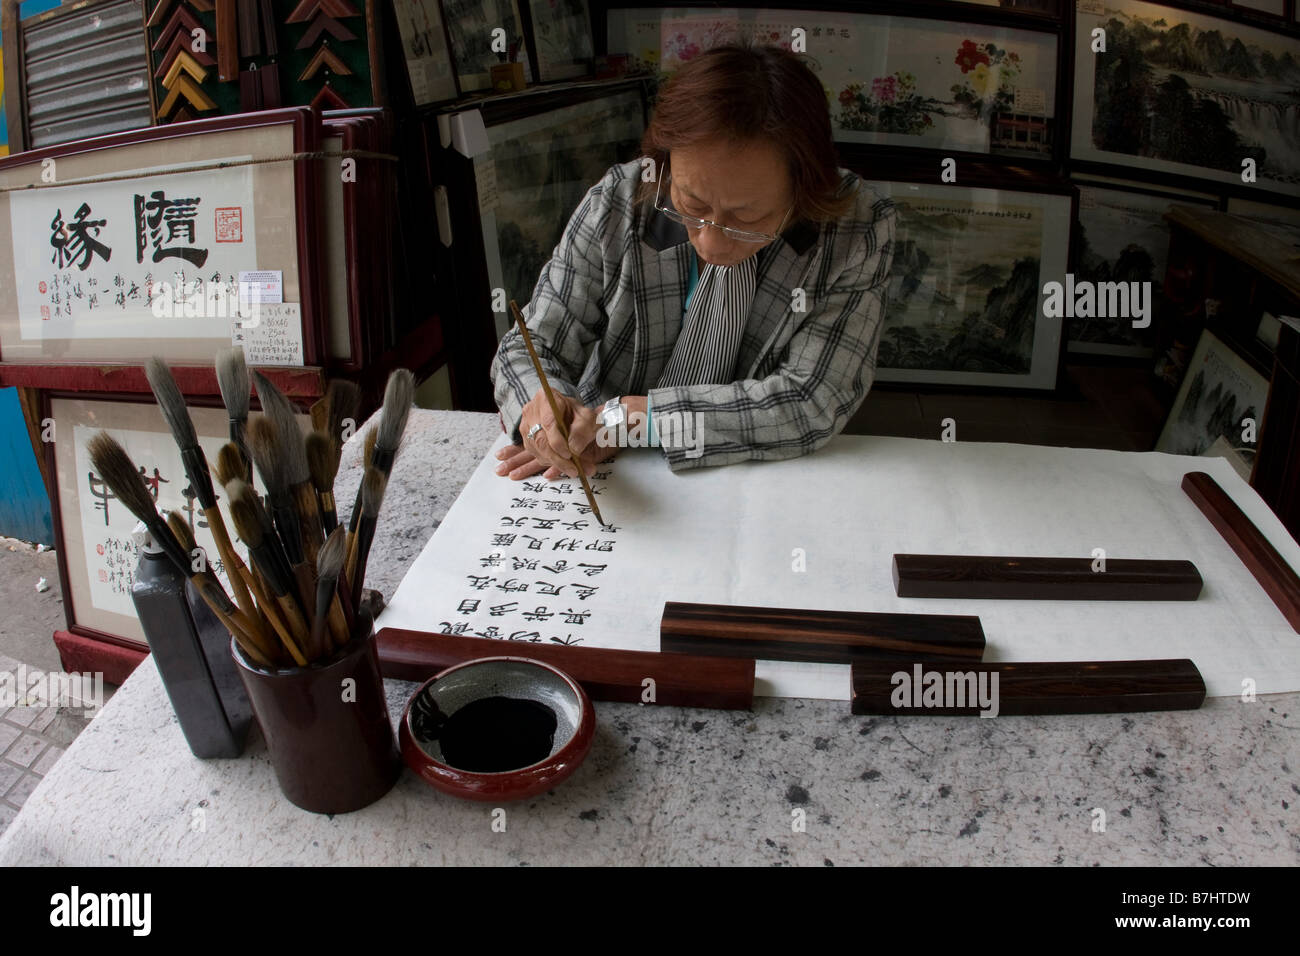 Chinese artiest and shop owner sitting creating a new artwork piece using Chinese Calligraphy Canton Guangzhou Guangdong China Stock Photo